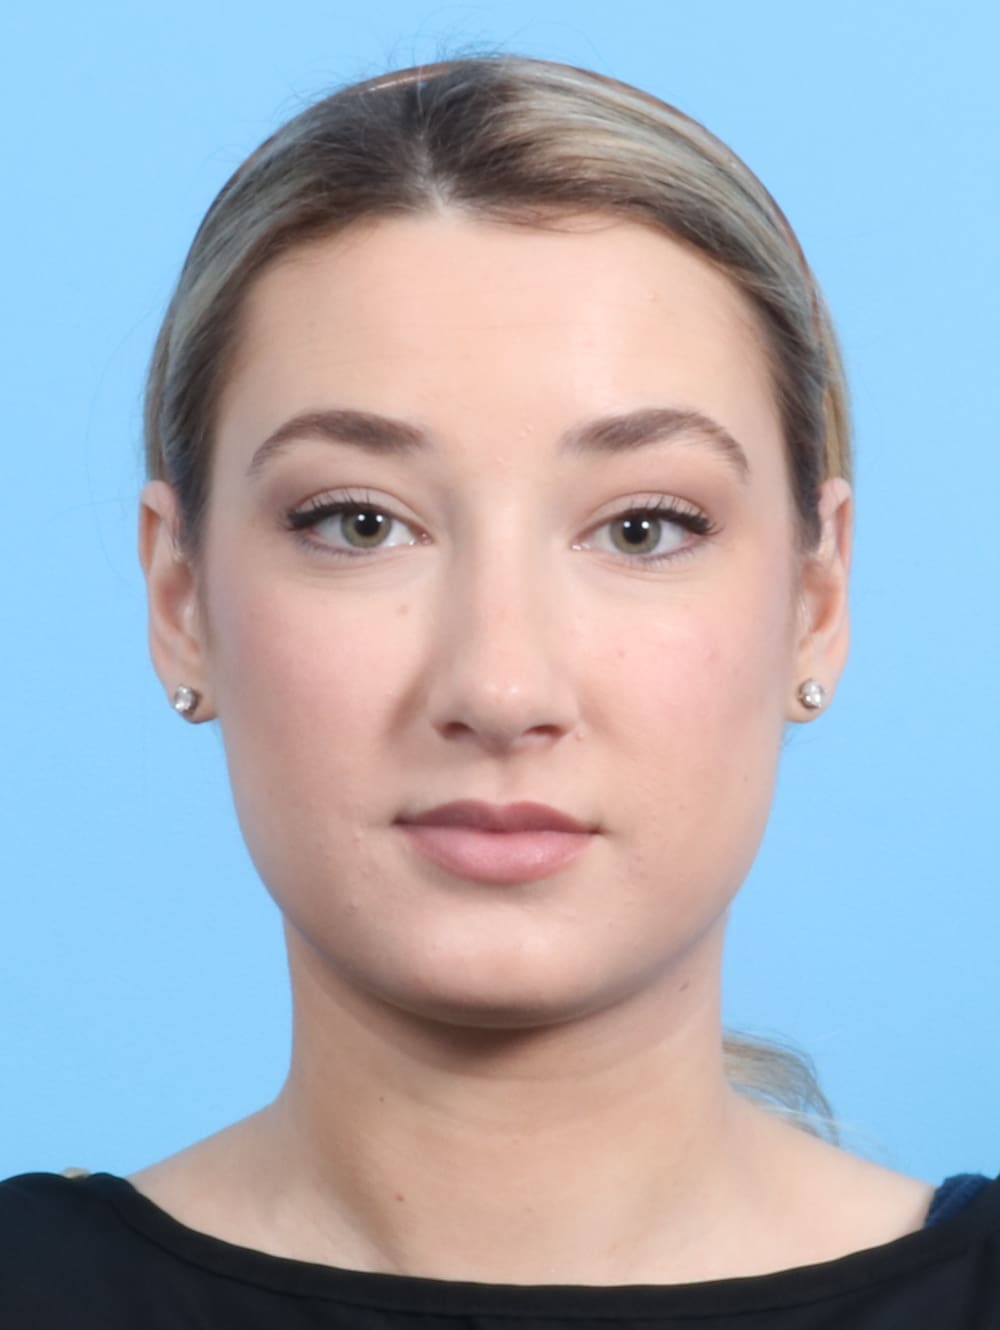 Rhinoplasty Patient Photo - Case 2240 - after view-1